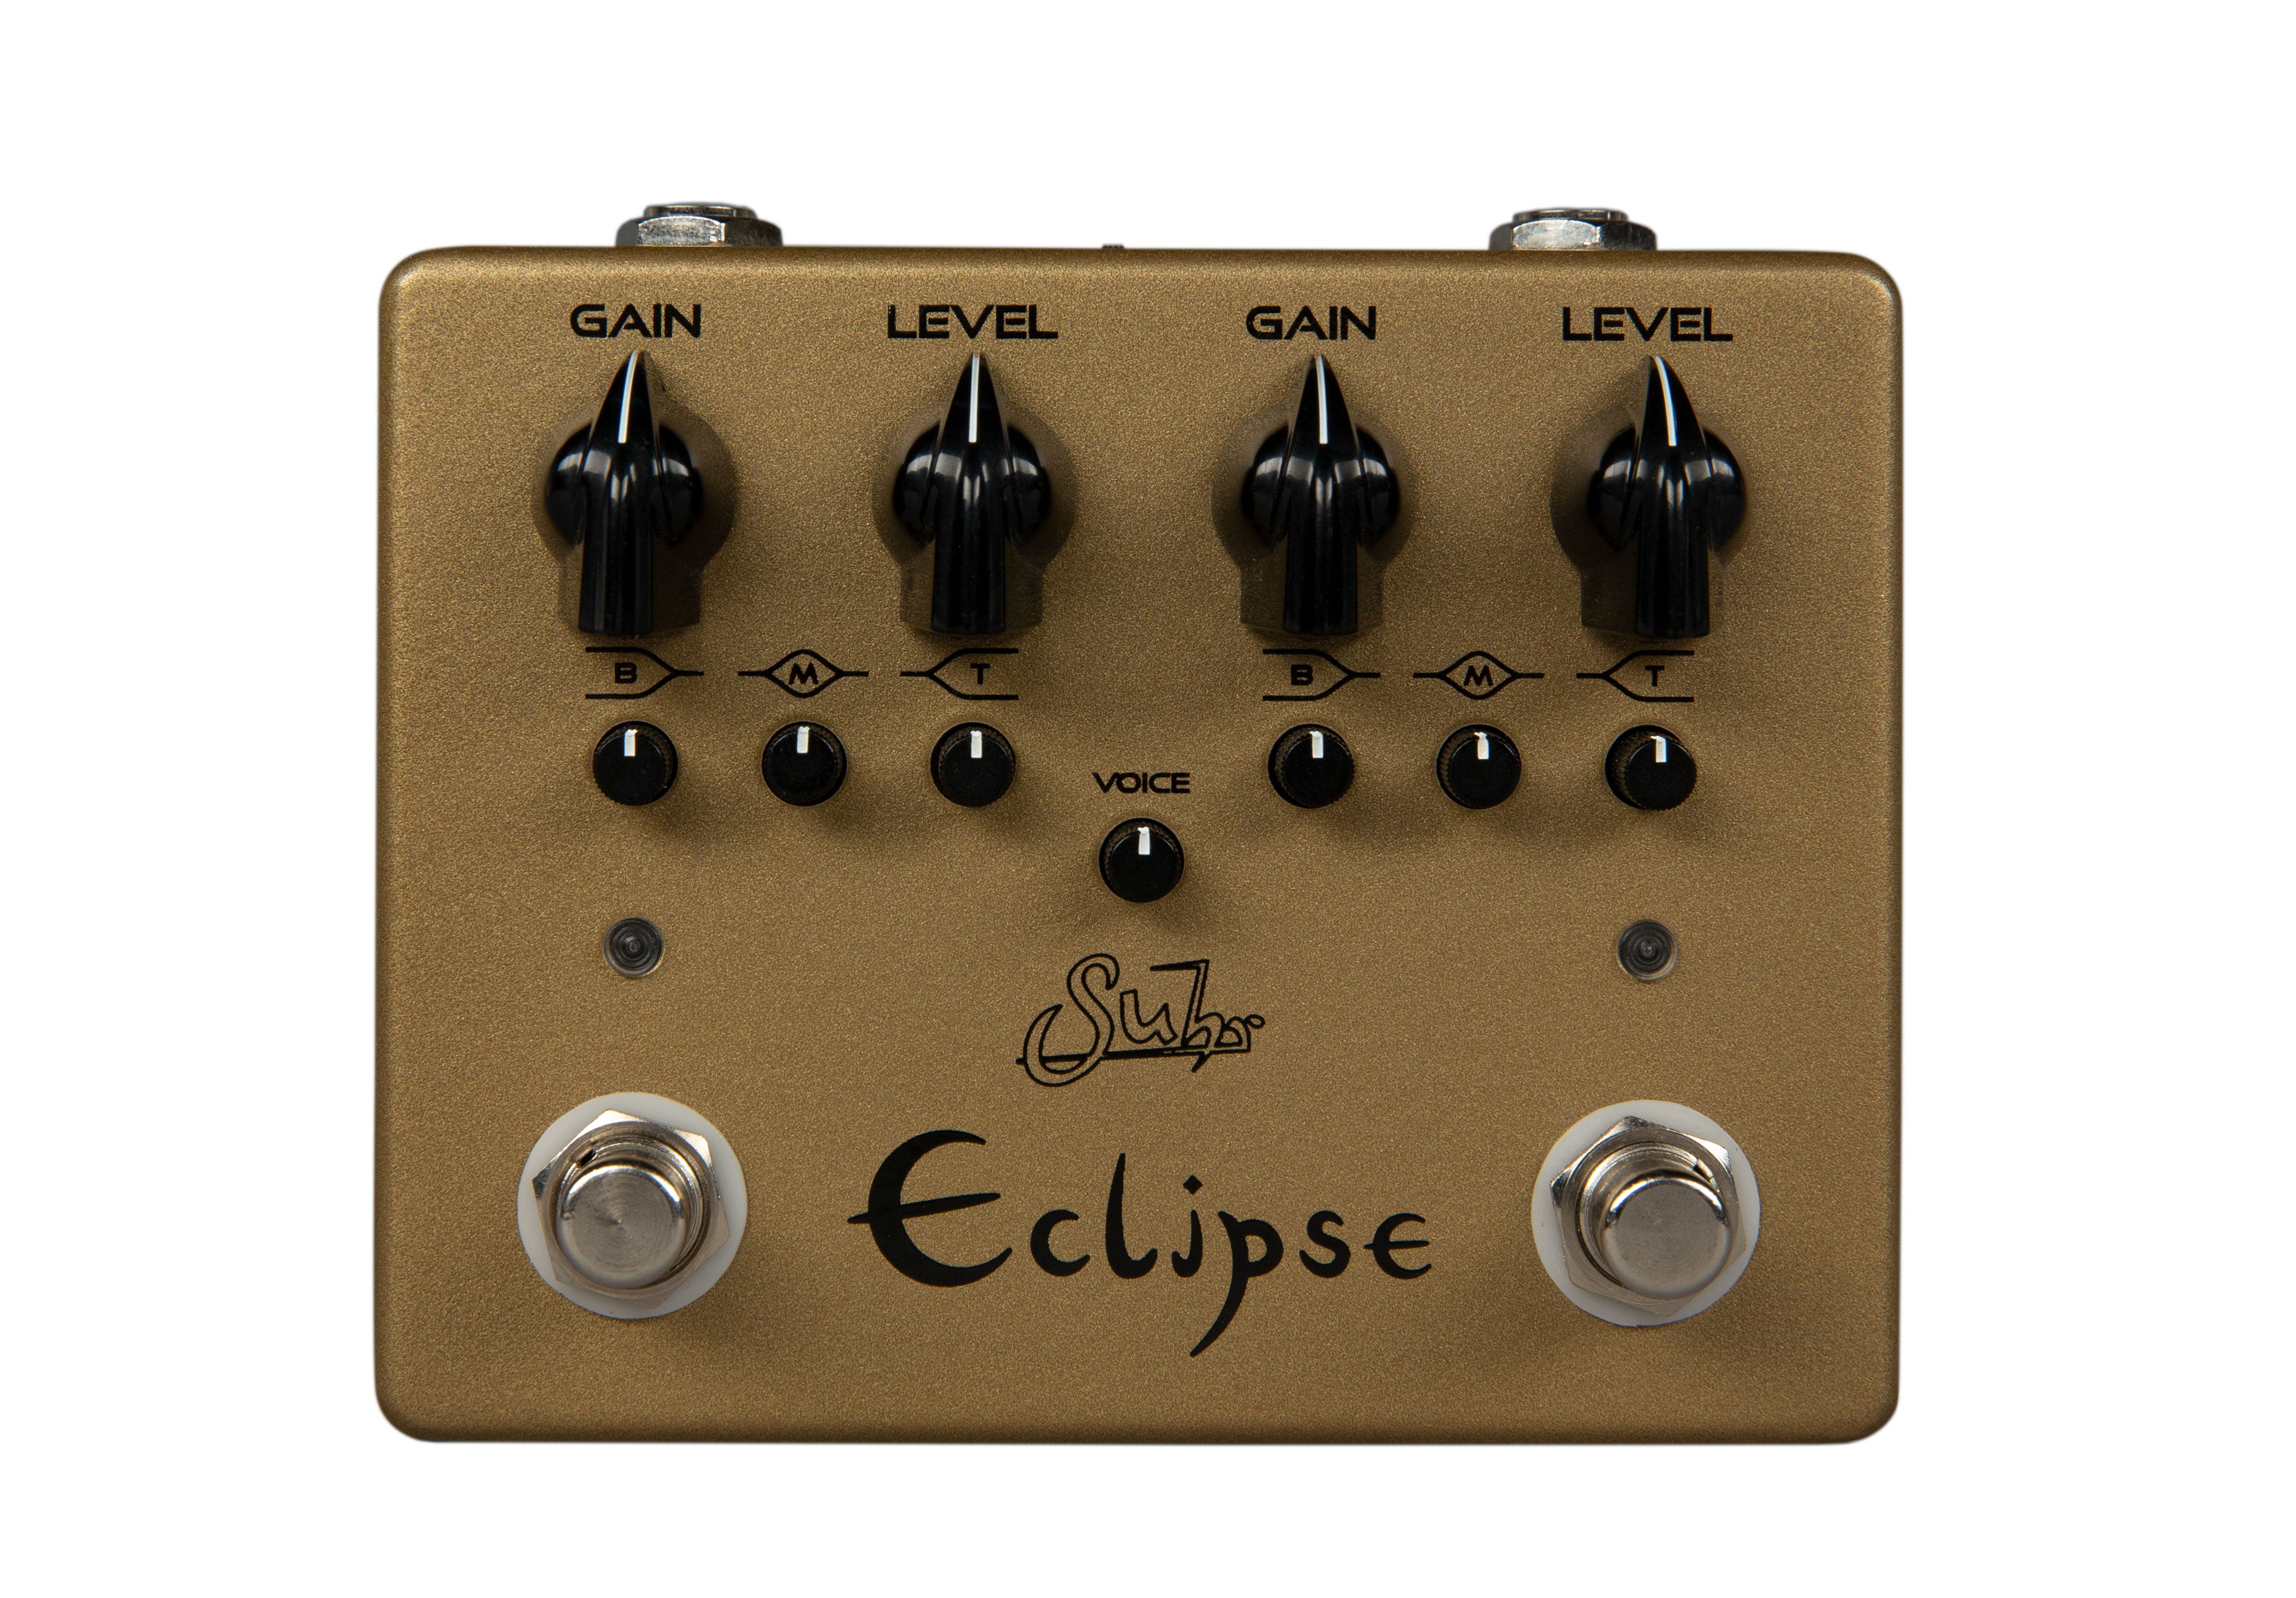 SUHR GOLD ECLIPSE DUAL CHANNEL OVERDRIVE/DISTORTION PEDAL 2020 Limited